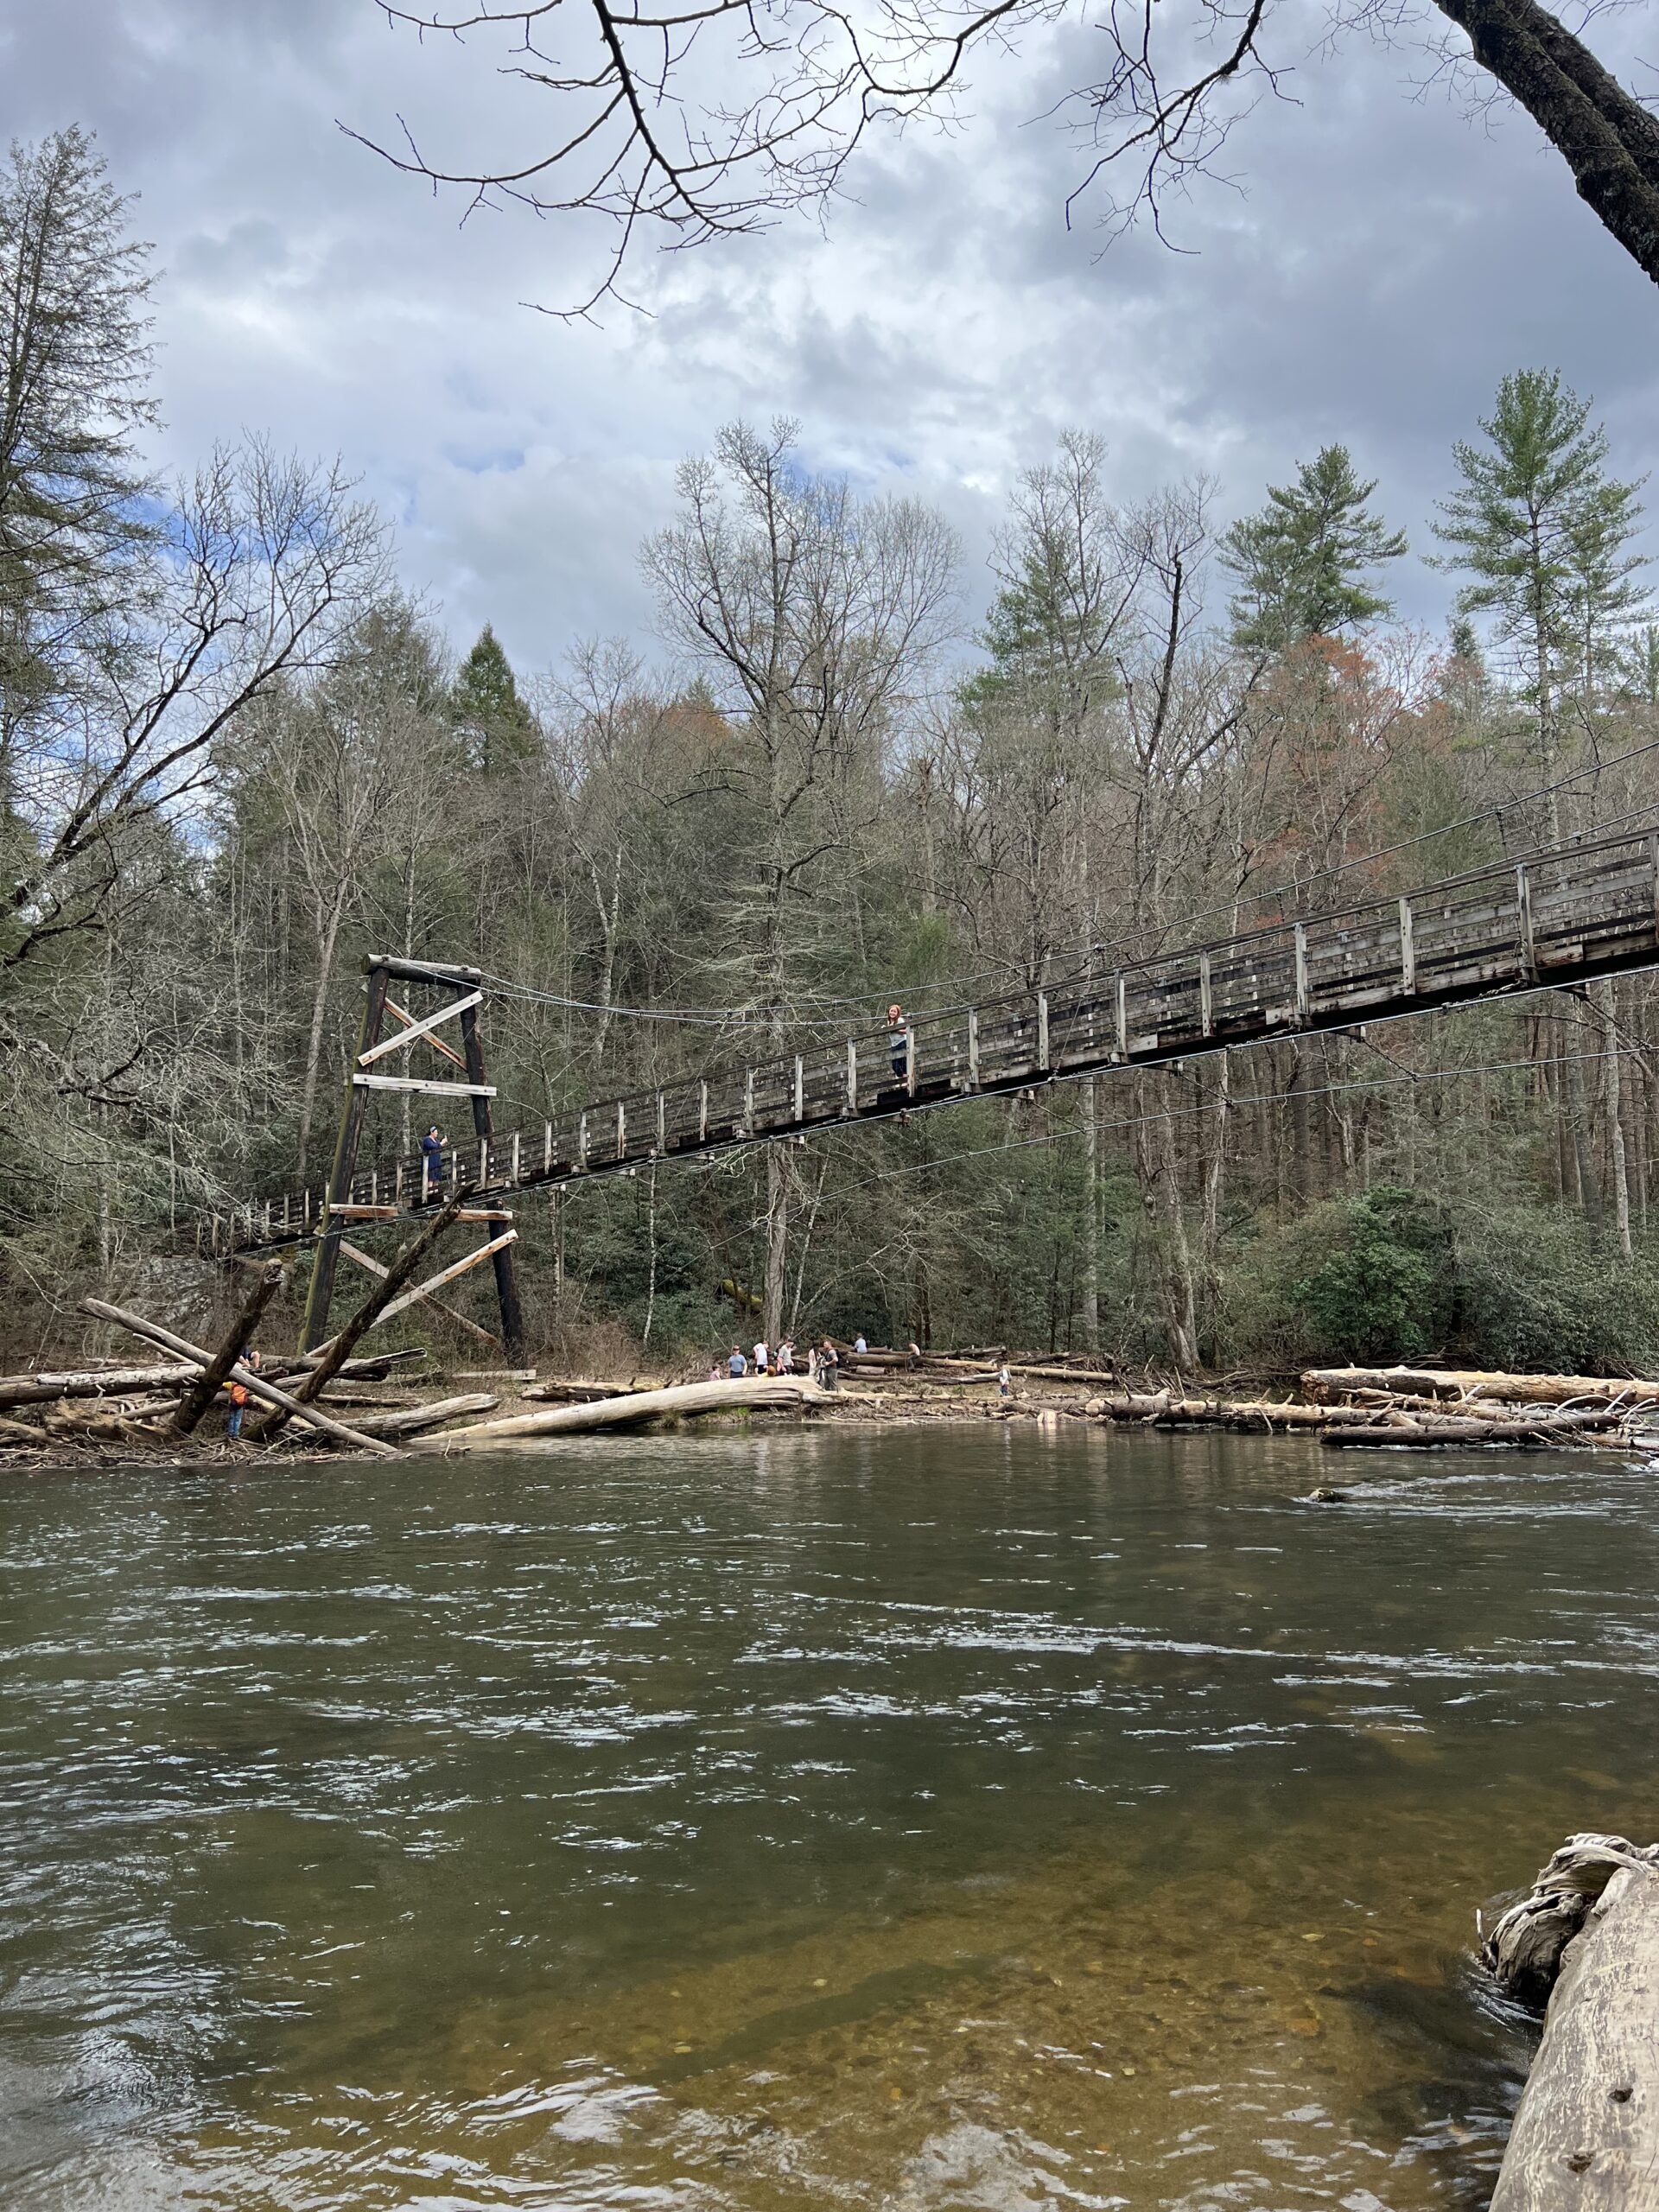 Toccoa Swinging Bridge 30 Things You Must Do in North Georgia Mountains